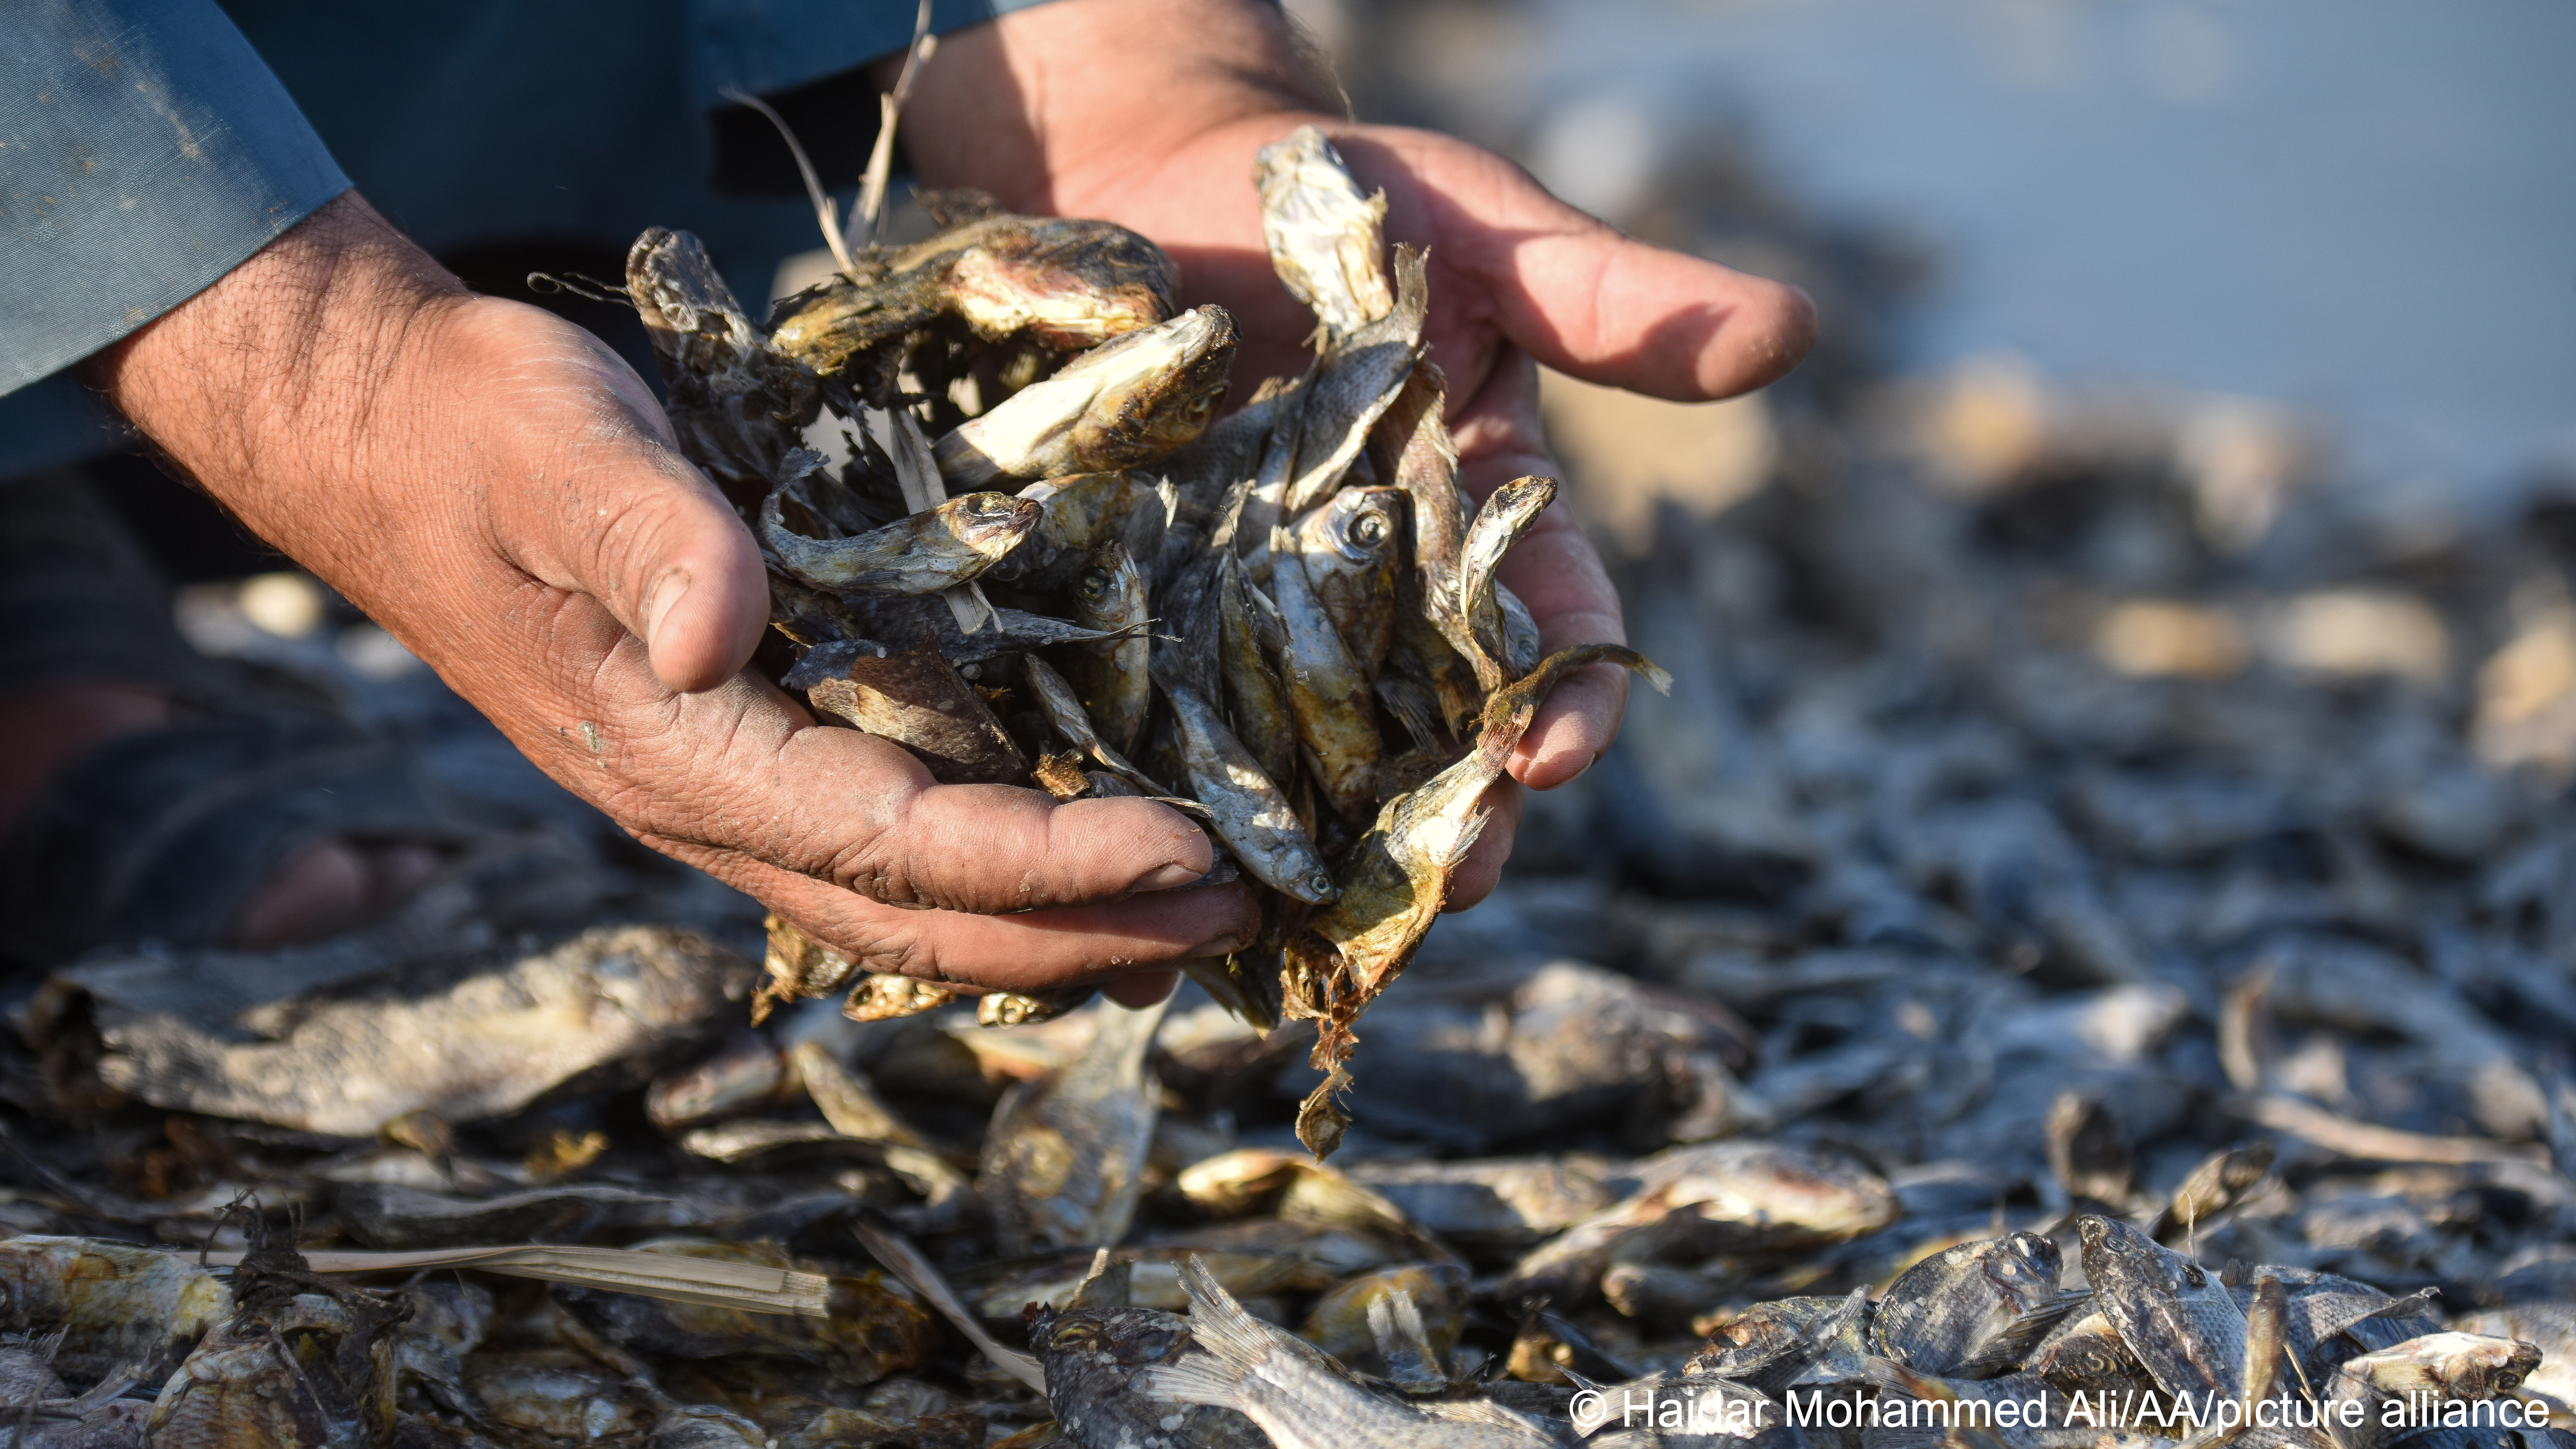 A person holds a handful of dead fish in Maysan Governate, south-eastern Iraq (photo: Haidar Mohammed Ali/AA/picture alliance)